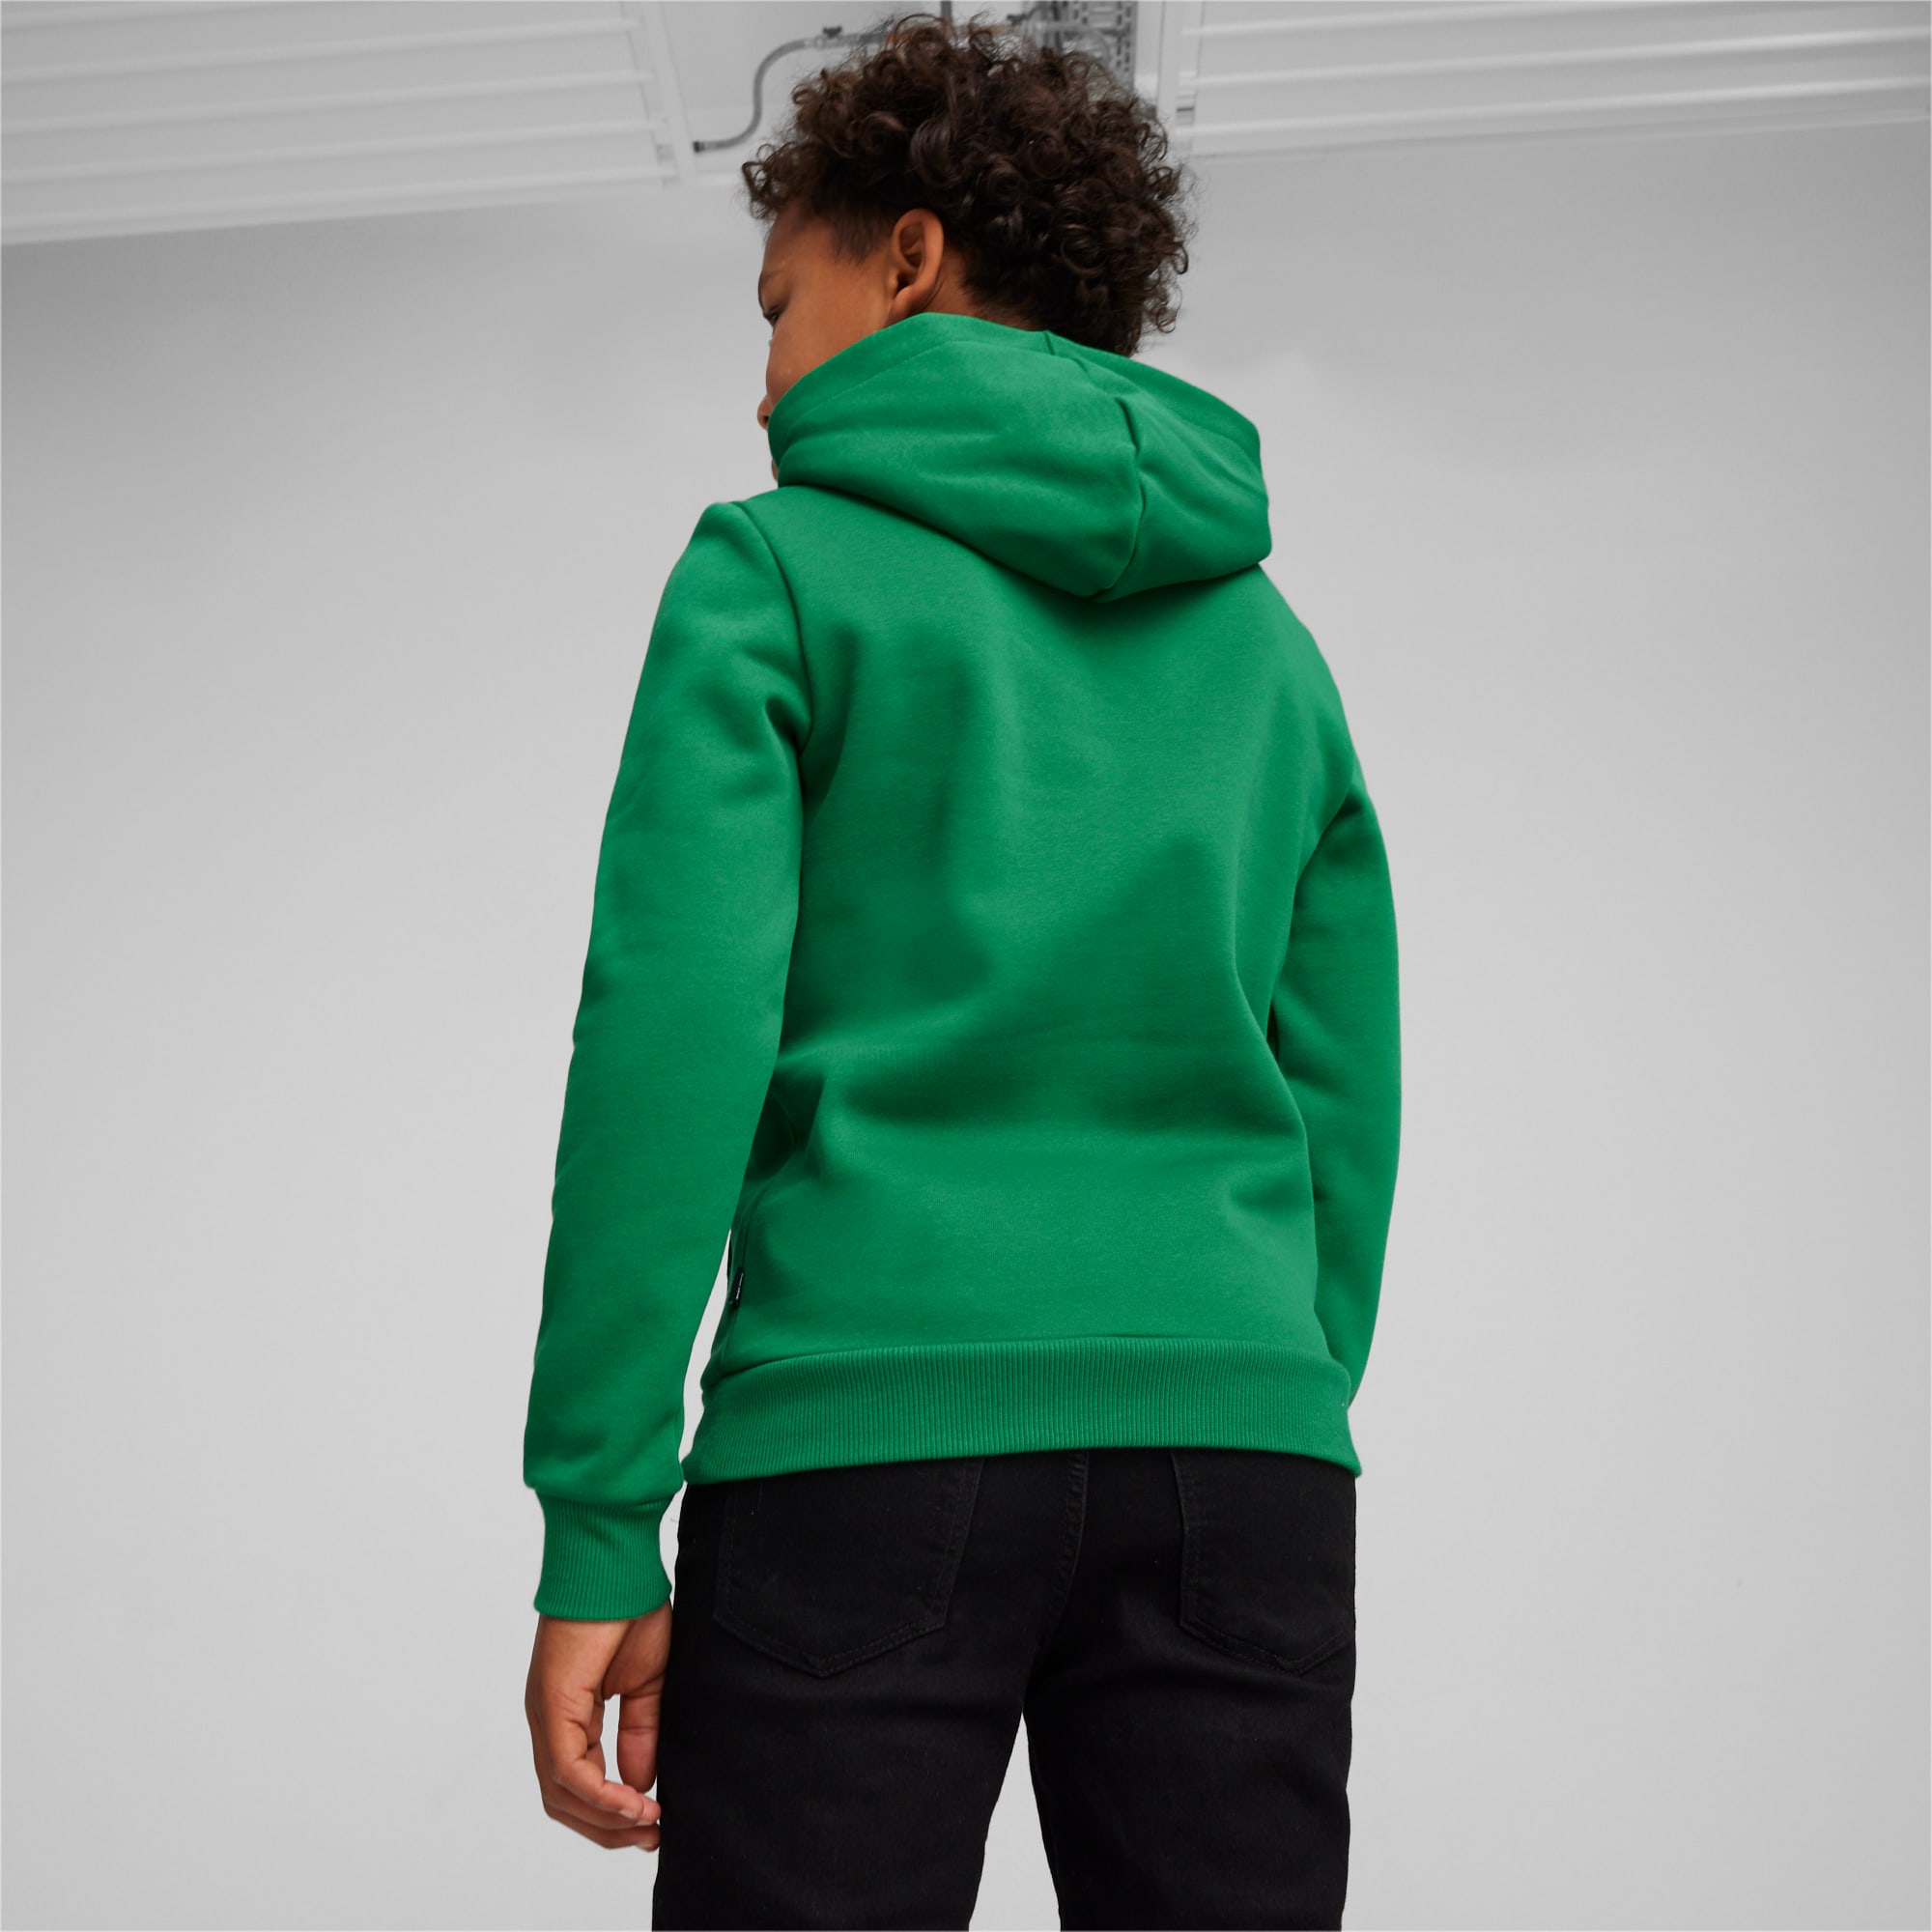 PUMA Essentials+ Two-Tone Big Logo Youth Hoodie, Archive Green, Size 92, Clothing